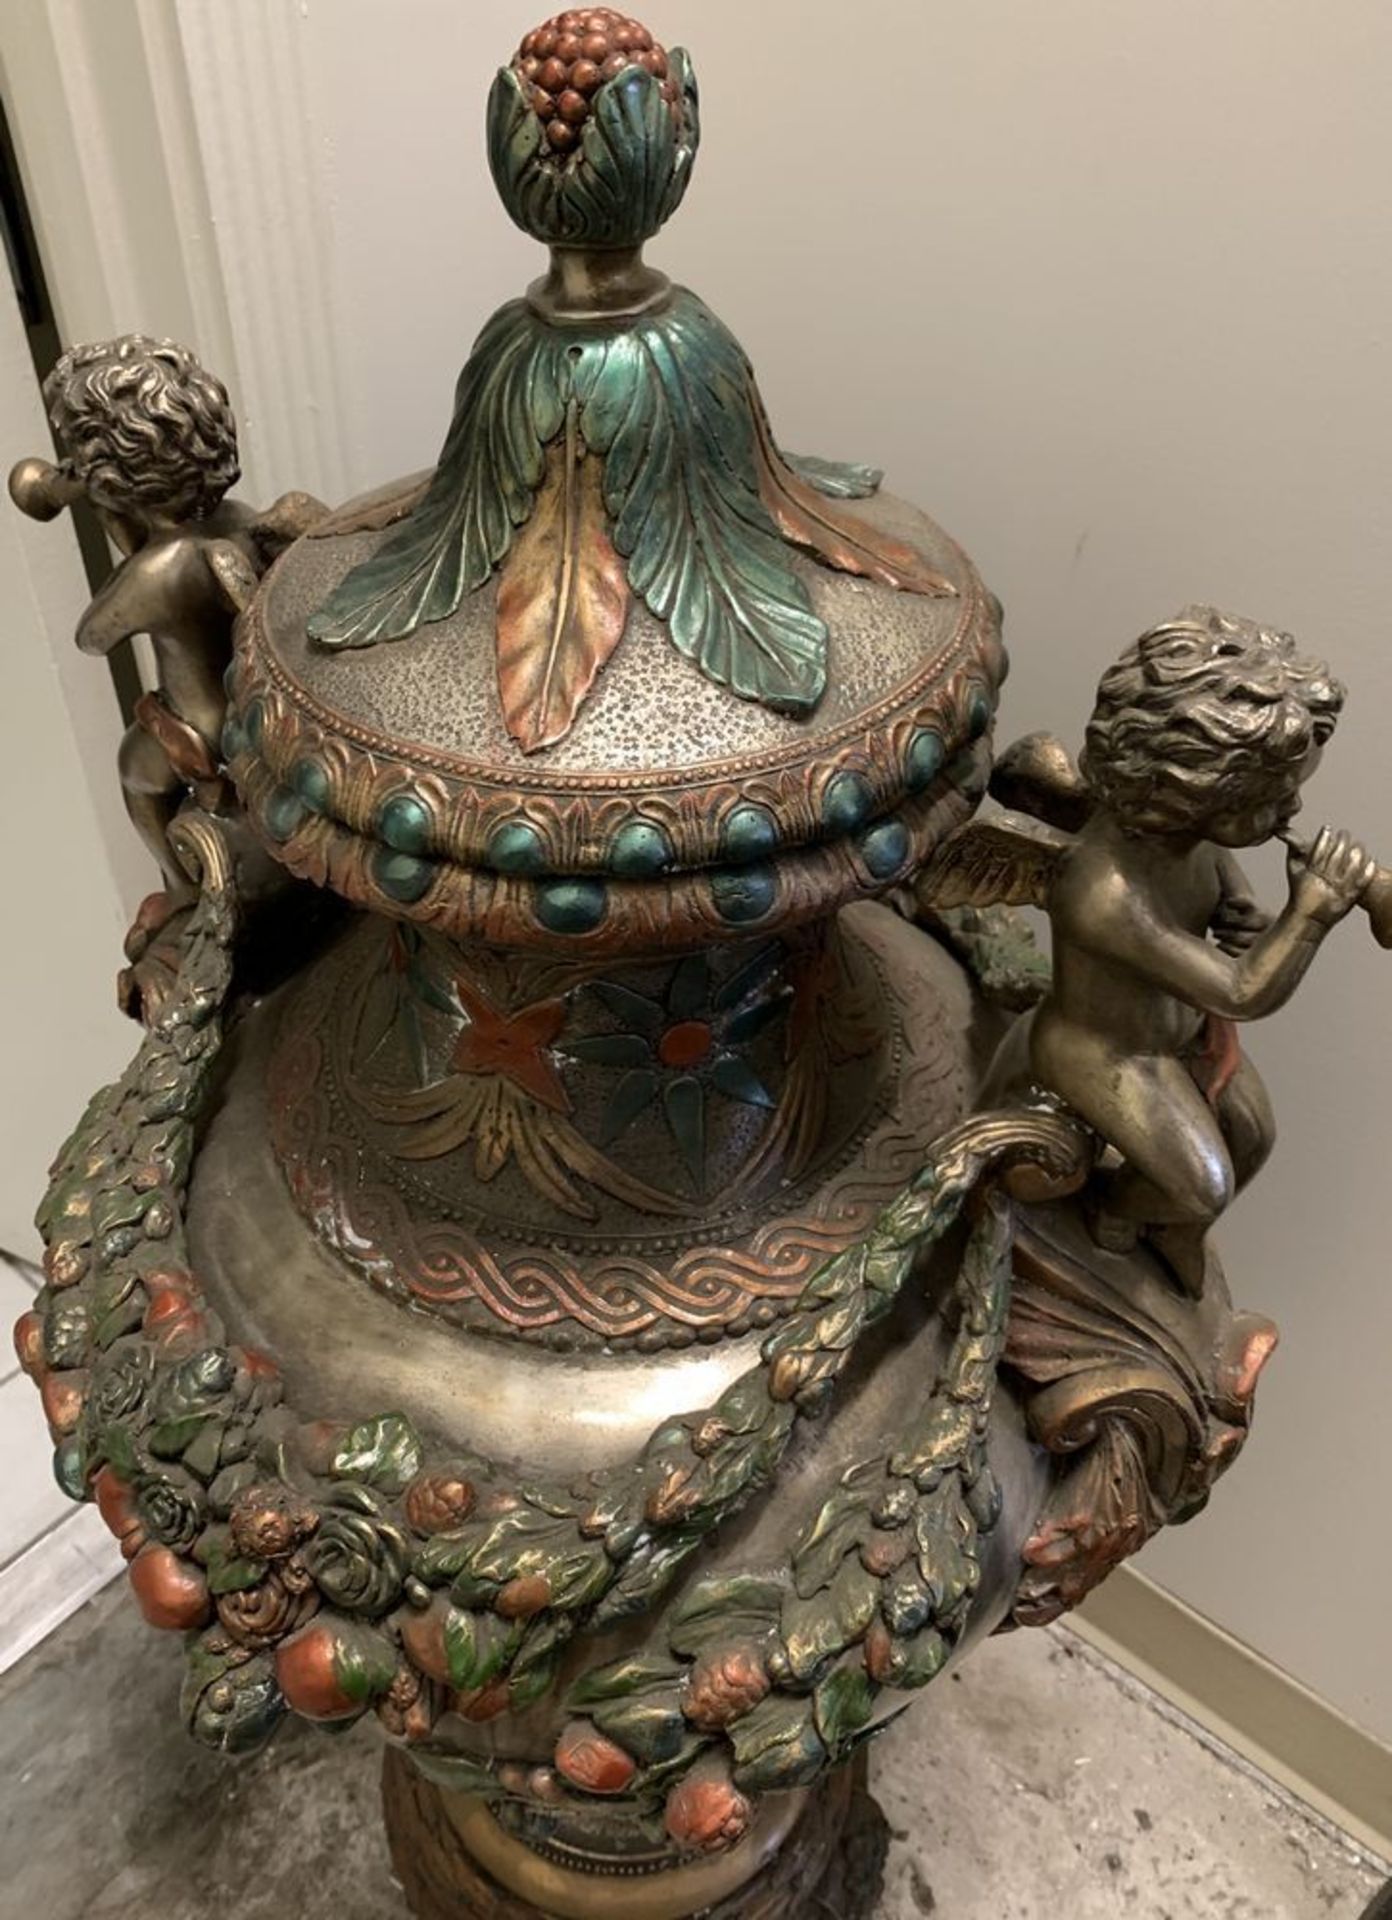 Bronze Vintage Urn Vase, Stands around 3.5' tall **If won, must be picked up in Chatsworth, CA. - Image 4 of 5